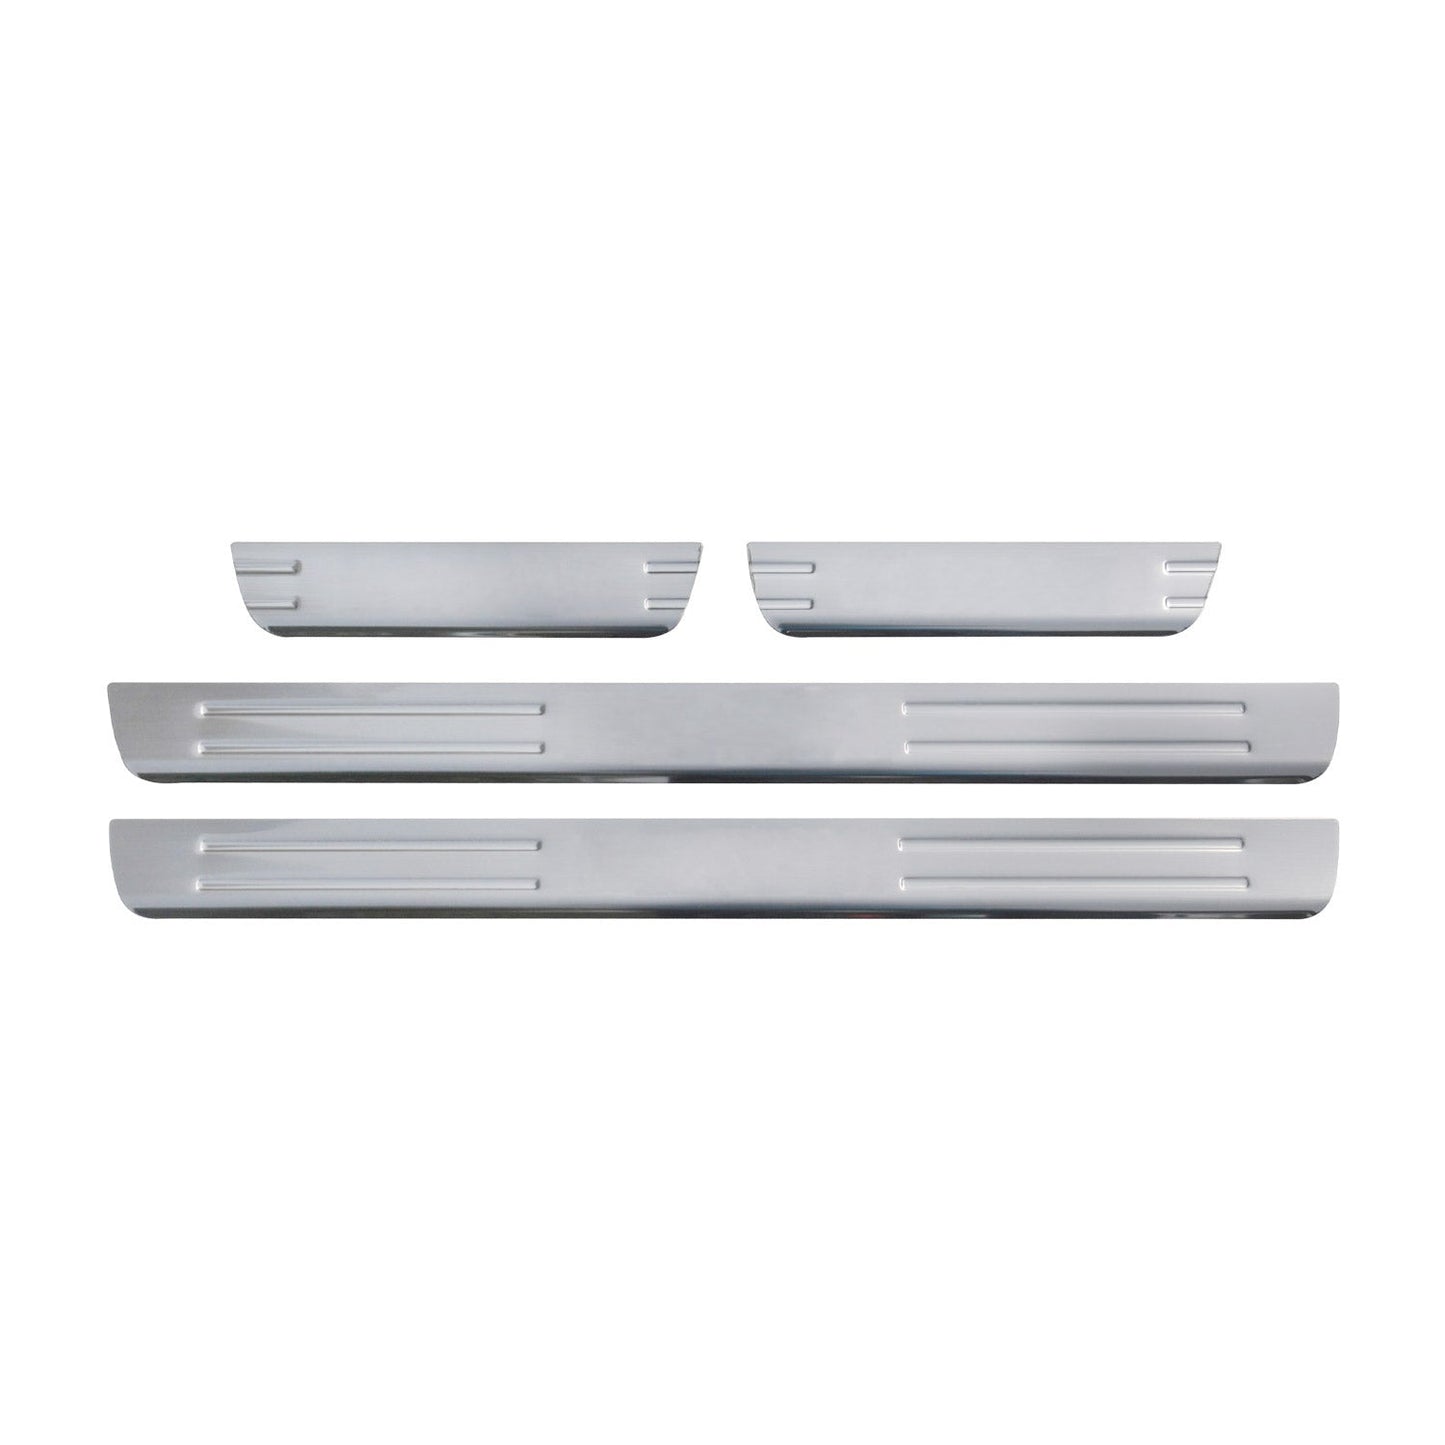 OMAC Door Sill Scuff Plate Scratch Protector for Mitsubishi Lancer Silver 4Pcs Steel '4902091